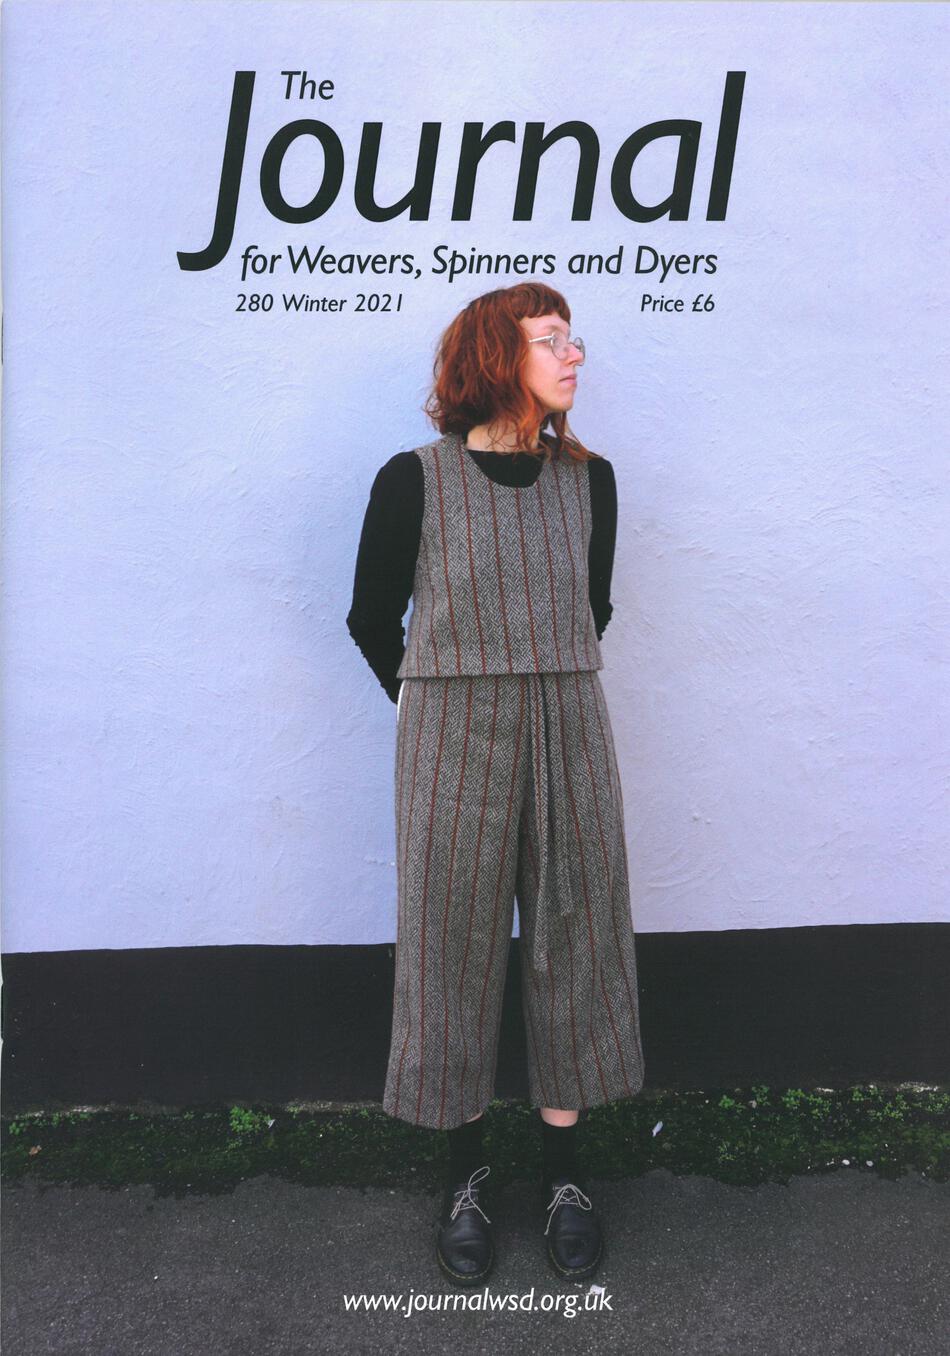 Weaving Magazines The Journal For Weavers Spinners and Dyers  UK  Issue 280 Winter 2021